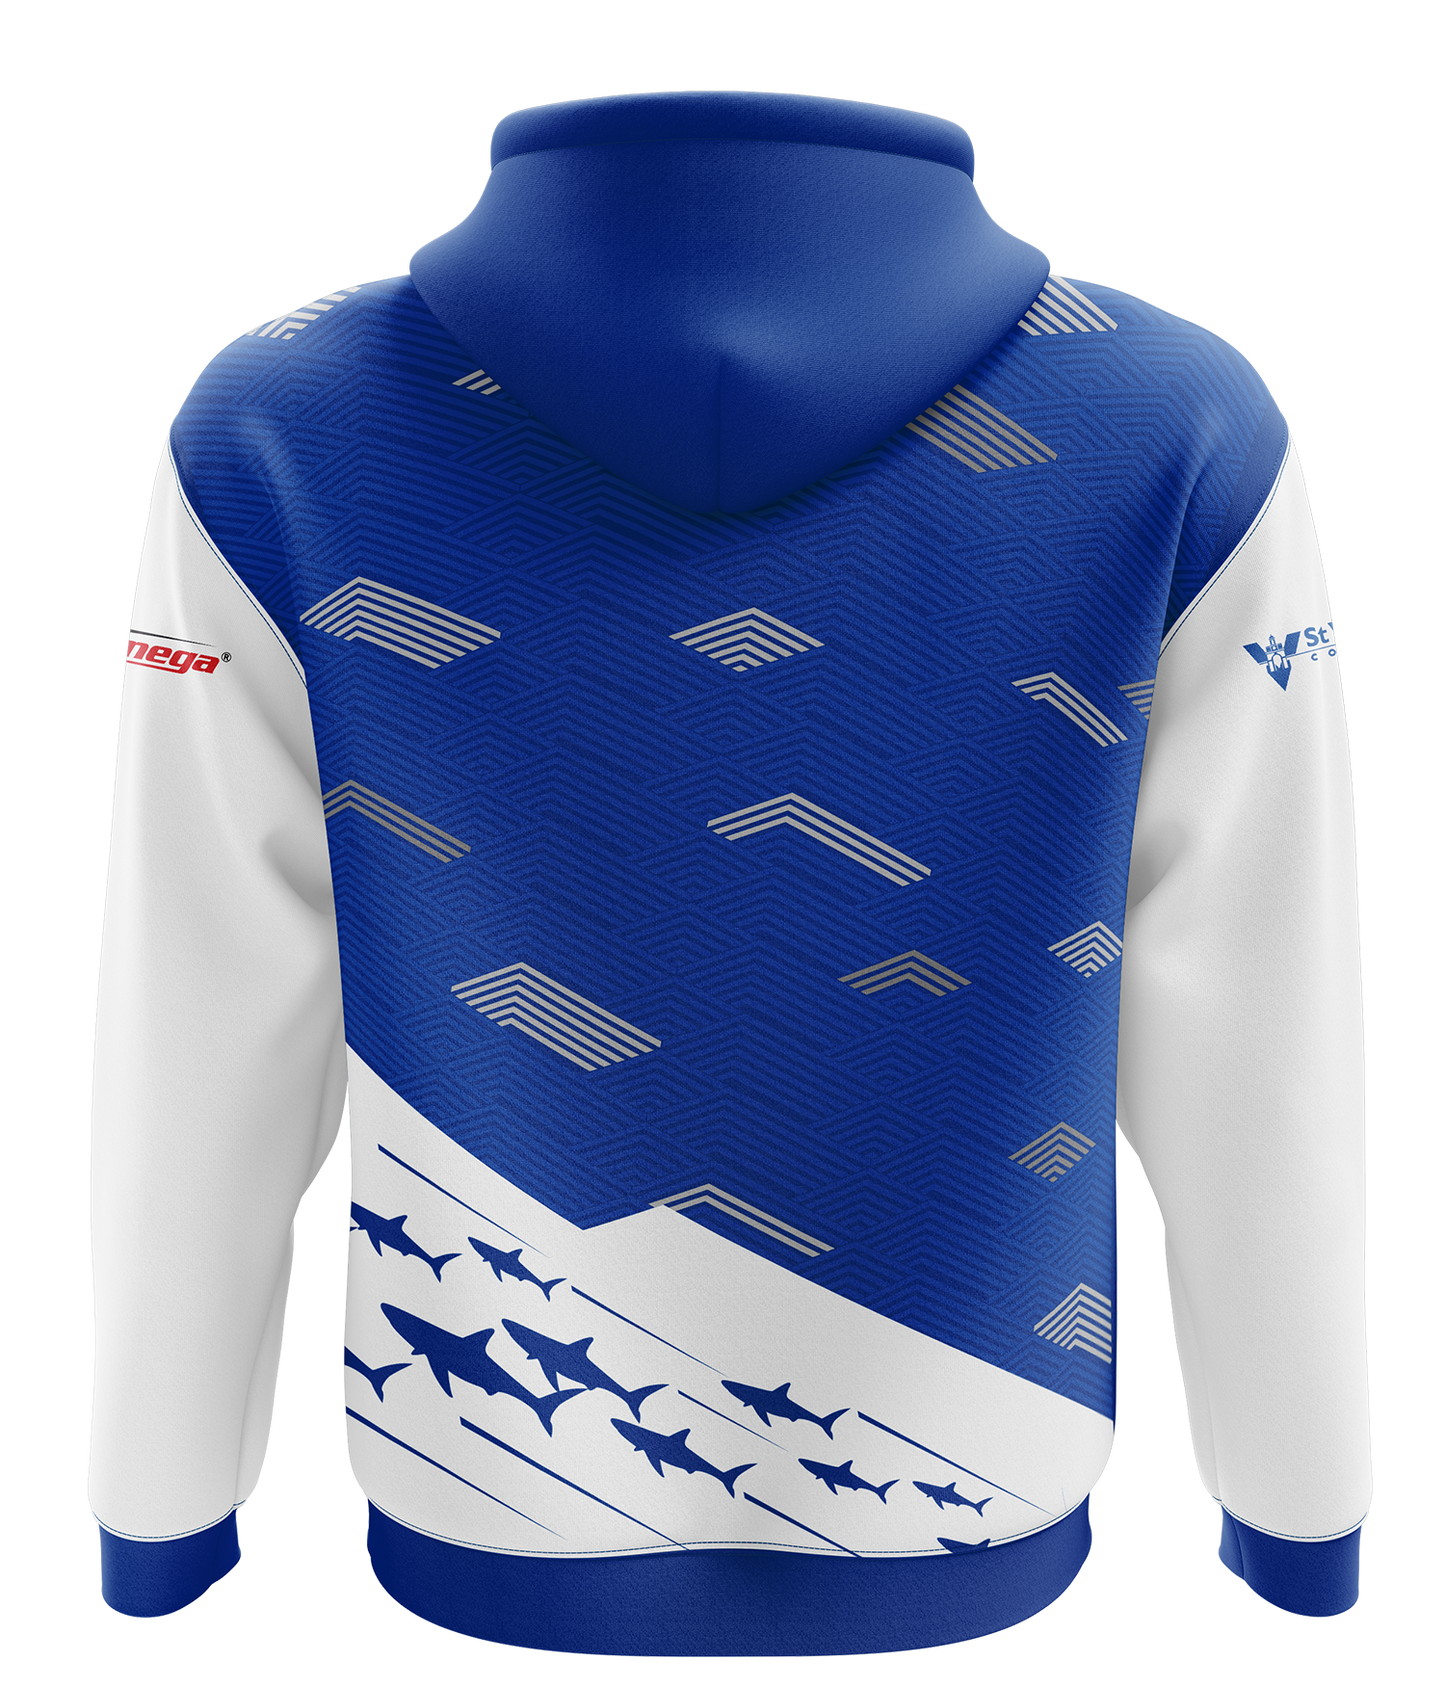 St Vincent Sharks Racing Esports Hoodie